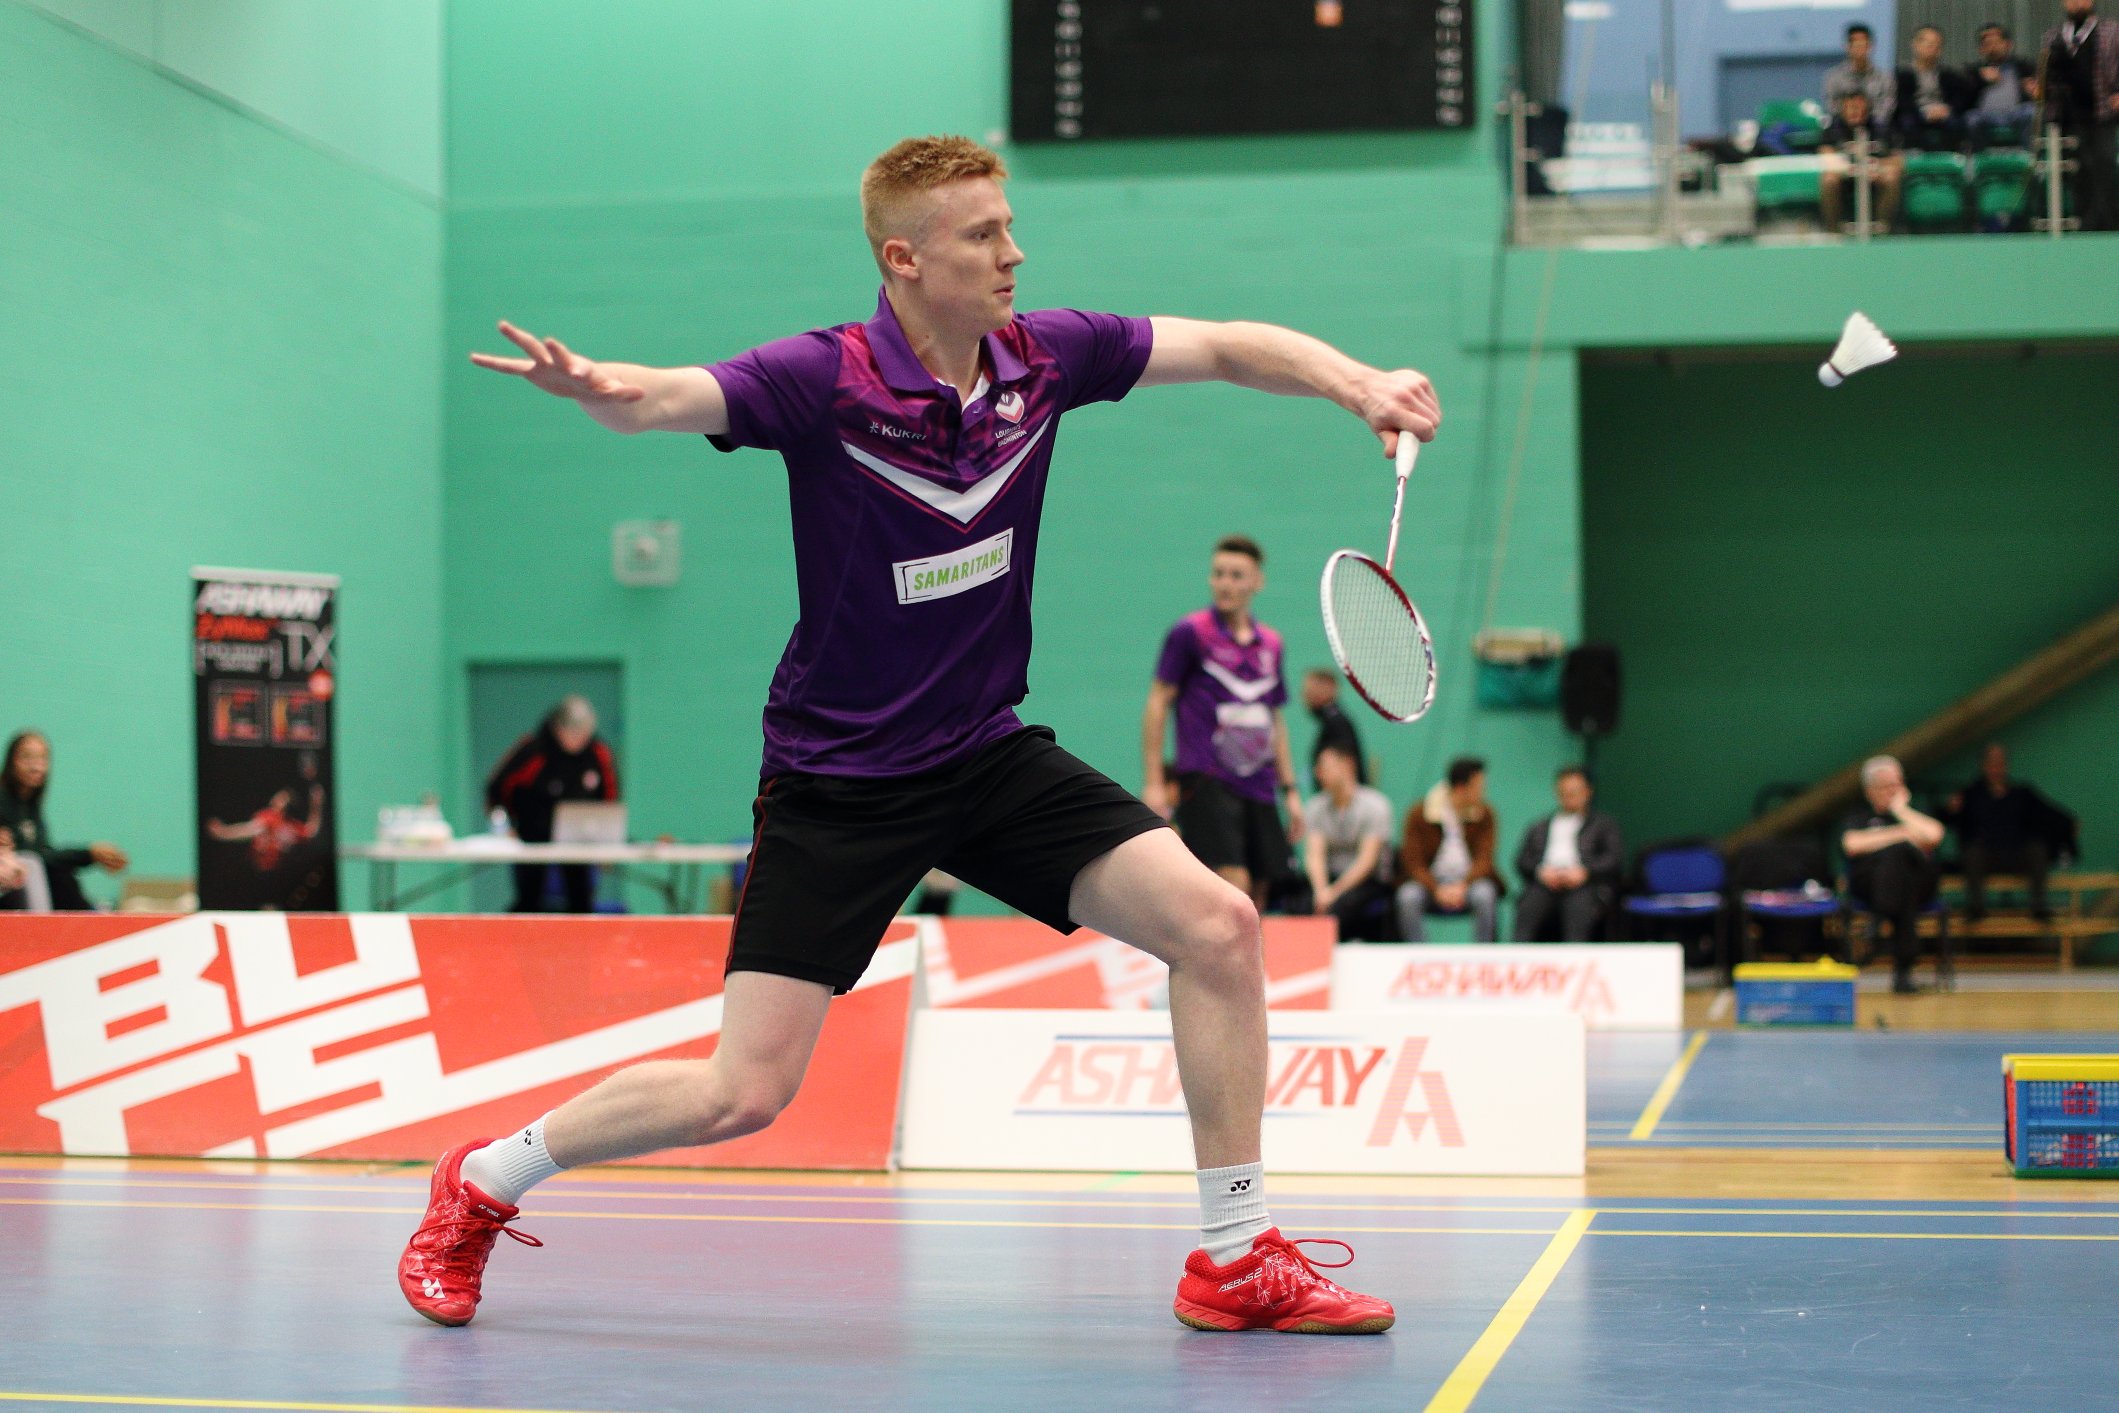 Lboro Badminton on Twitter: "Congratulations to David Jones on his call to the England team the European men's team championships to be held in France in February! 🏴󠁧󠁢󠁥󠁮󠁧󠁿 👏 @LboroSport